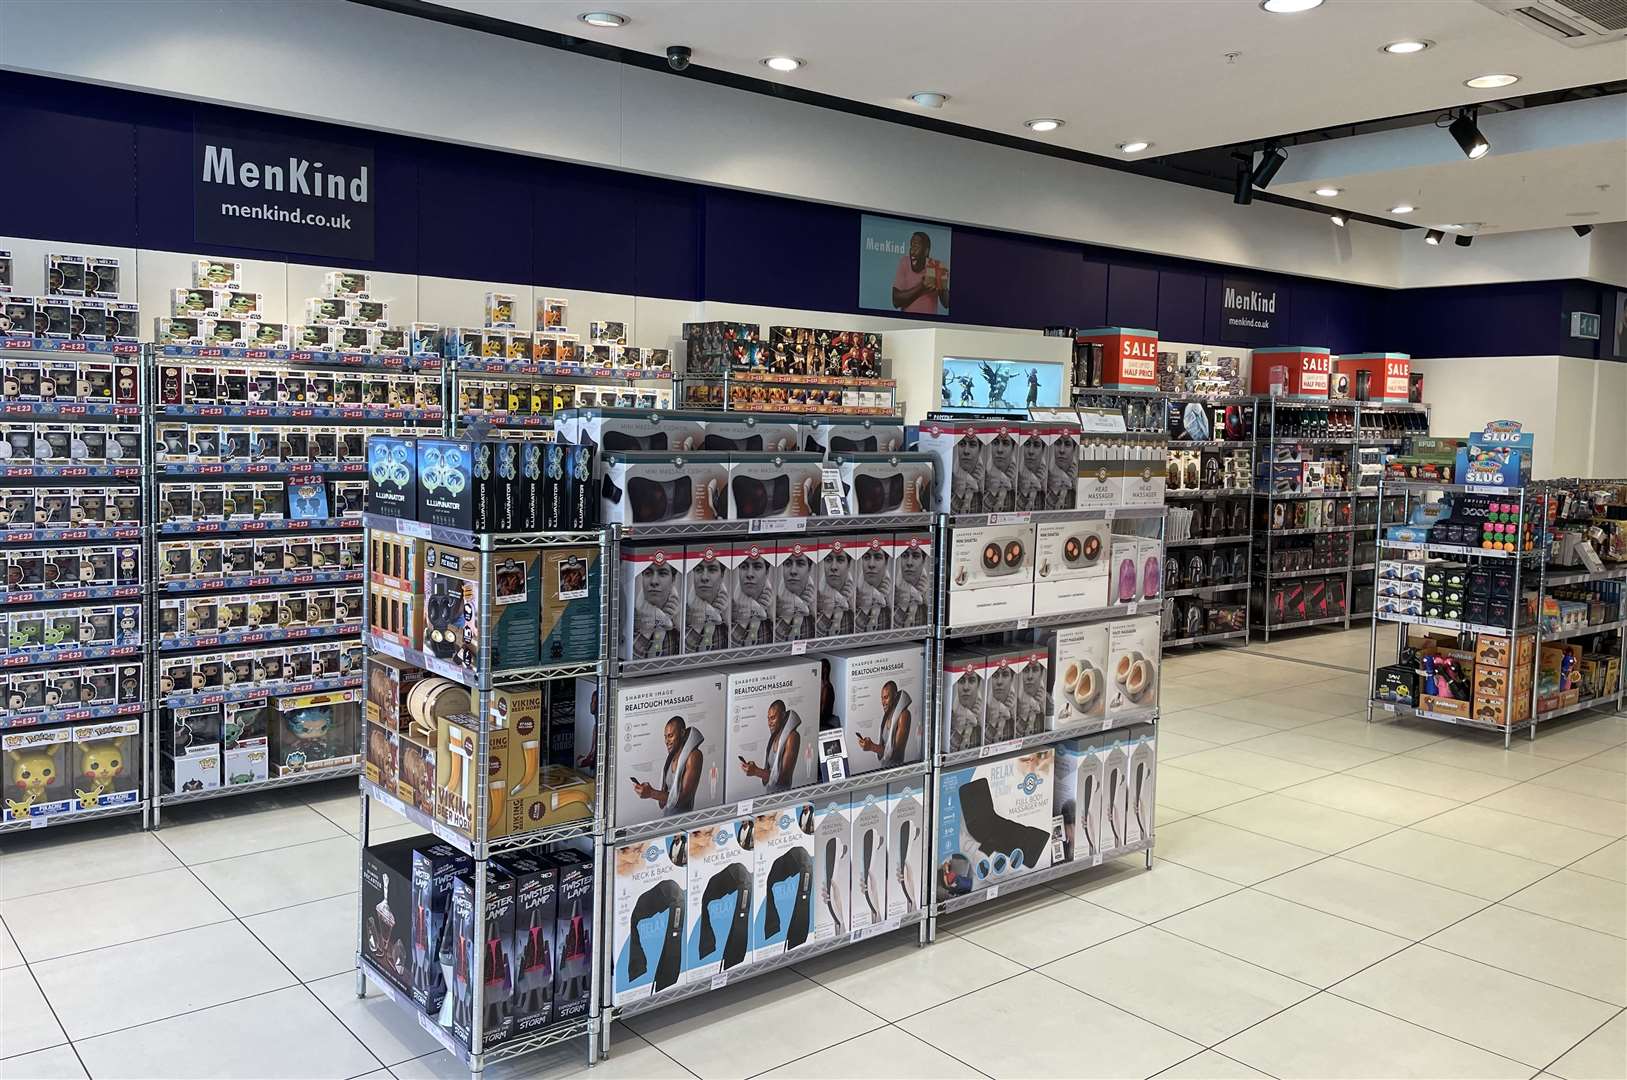 The retailer stocks a range of personalised items and tech. Picture: Fremlin Walk